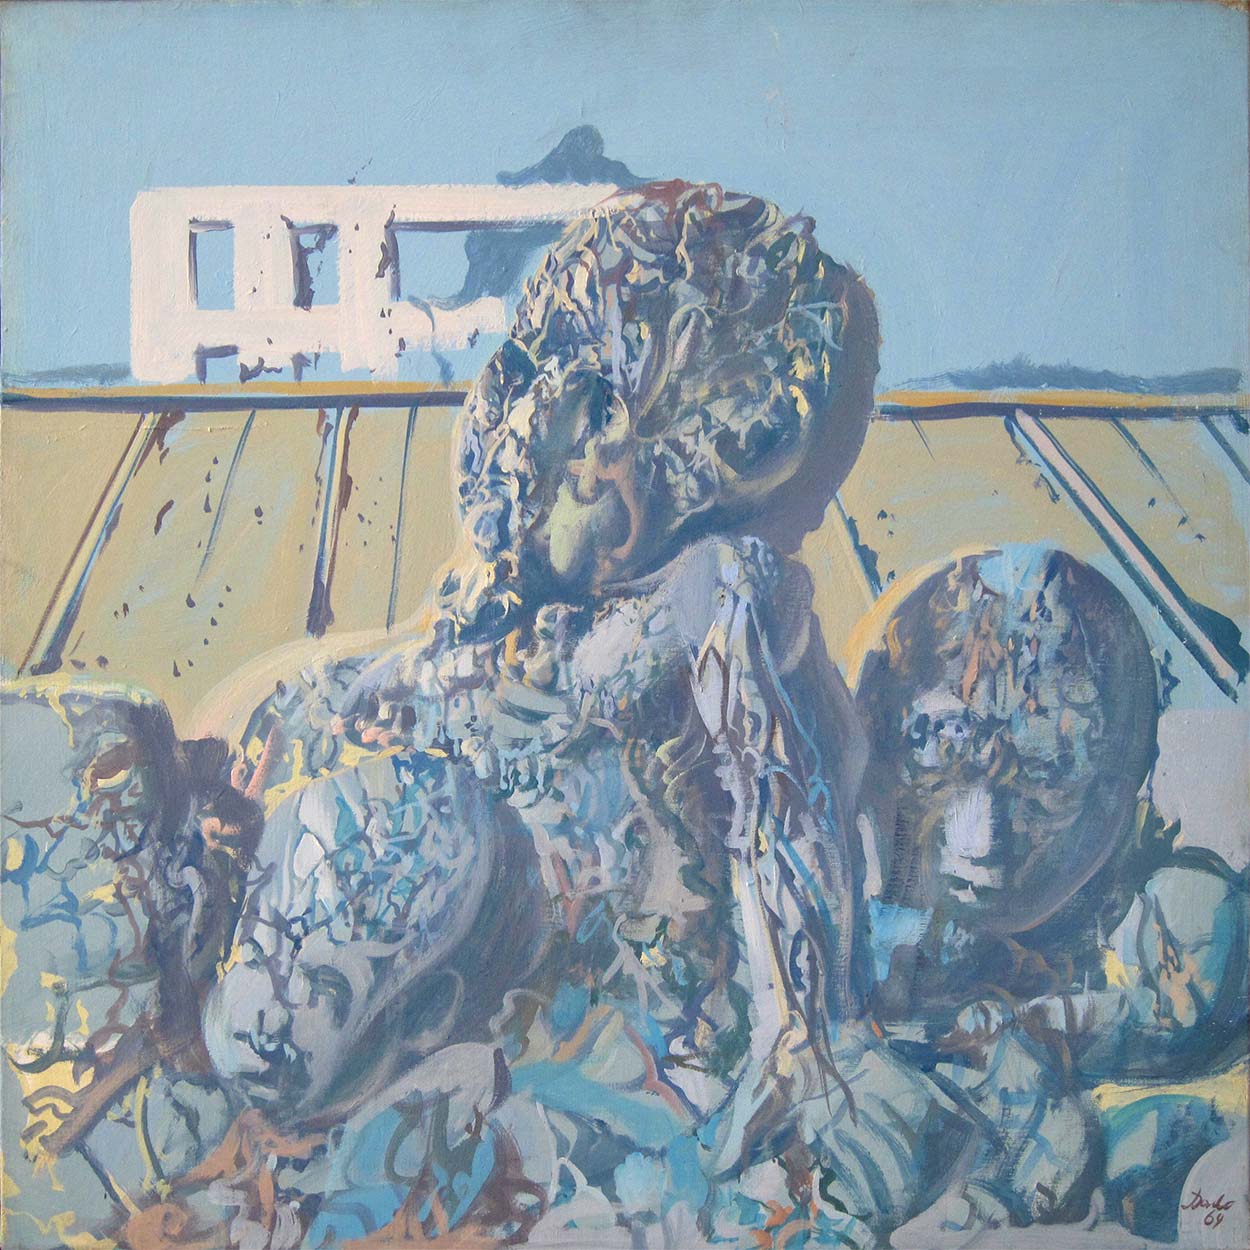 Dado’s painting: Untitled, 1969